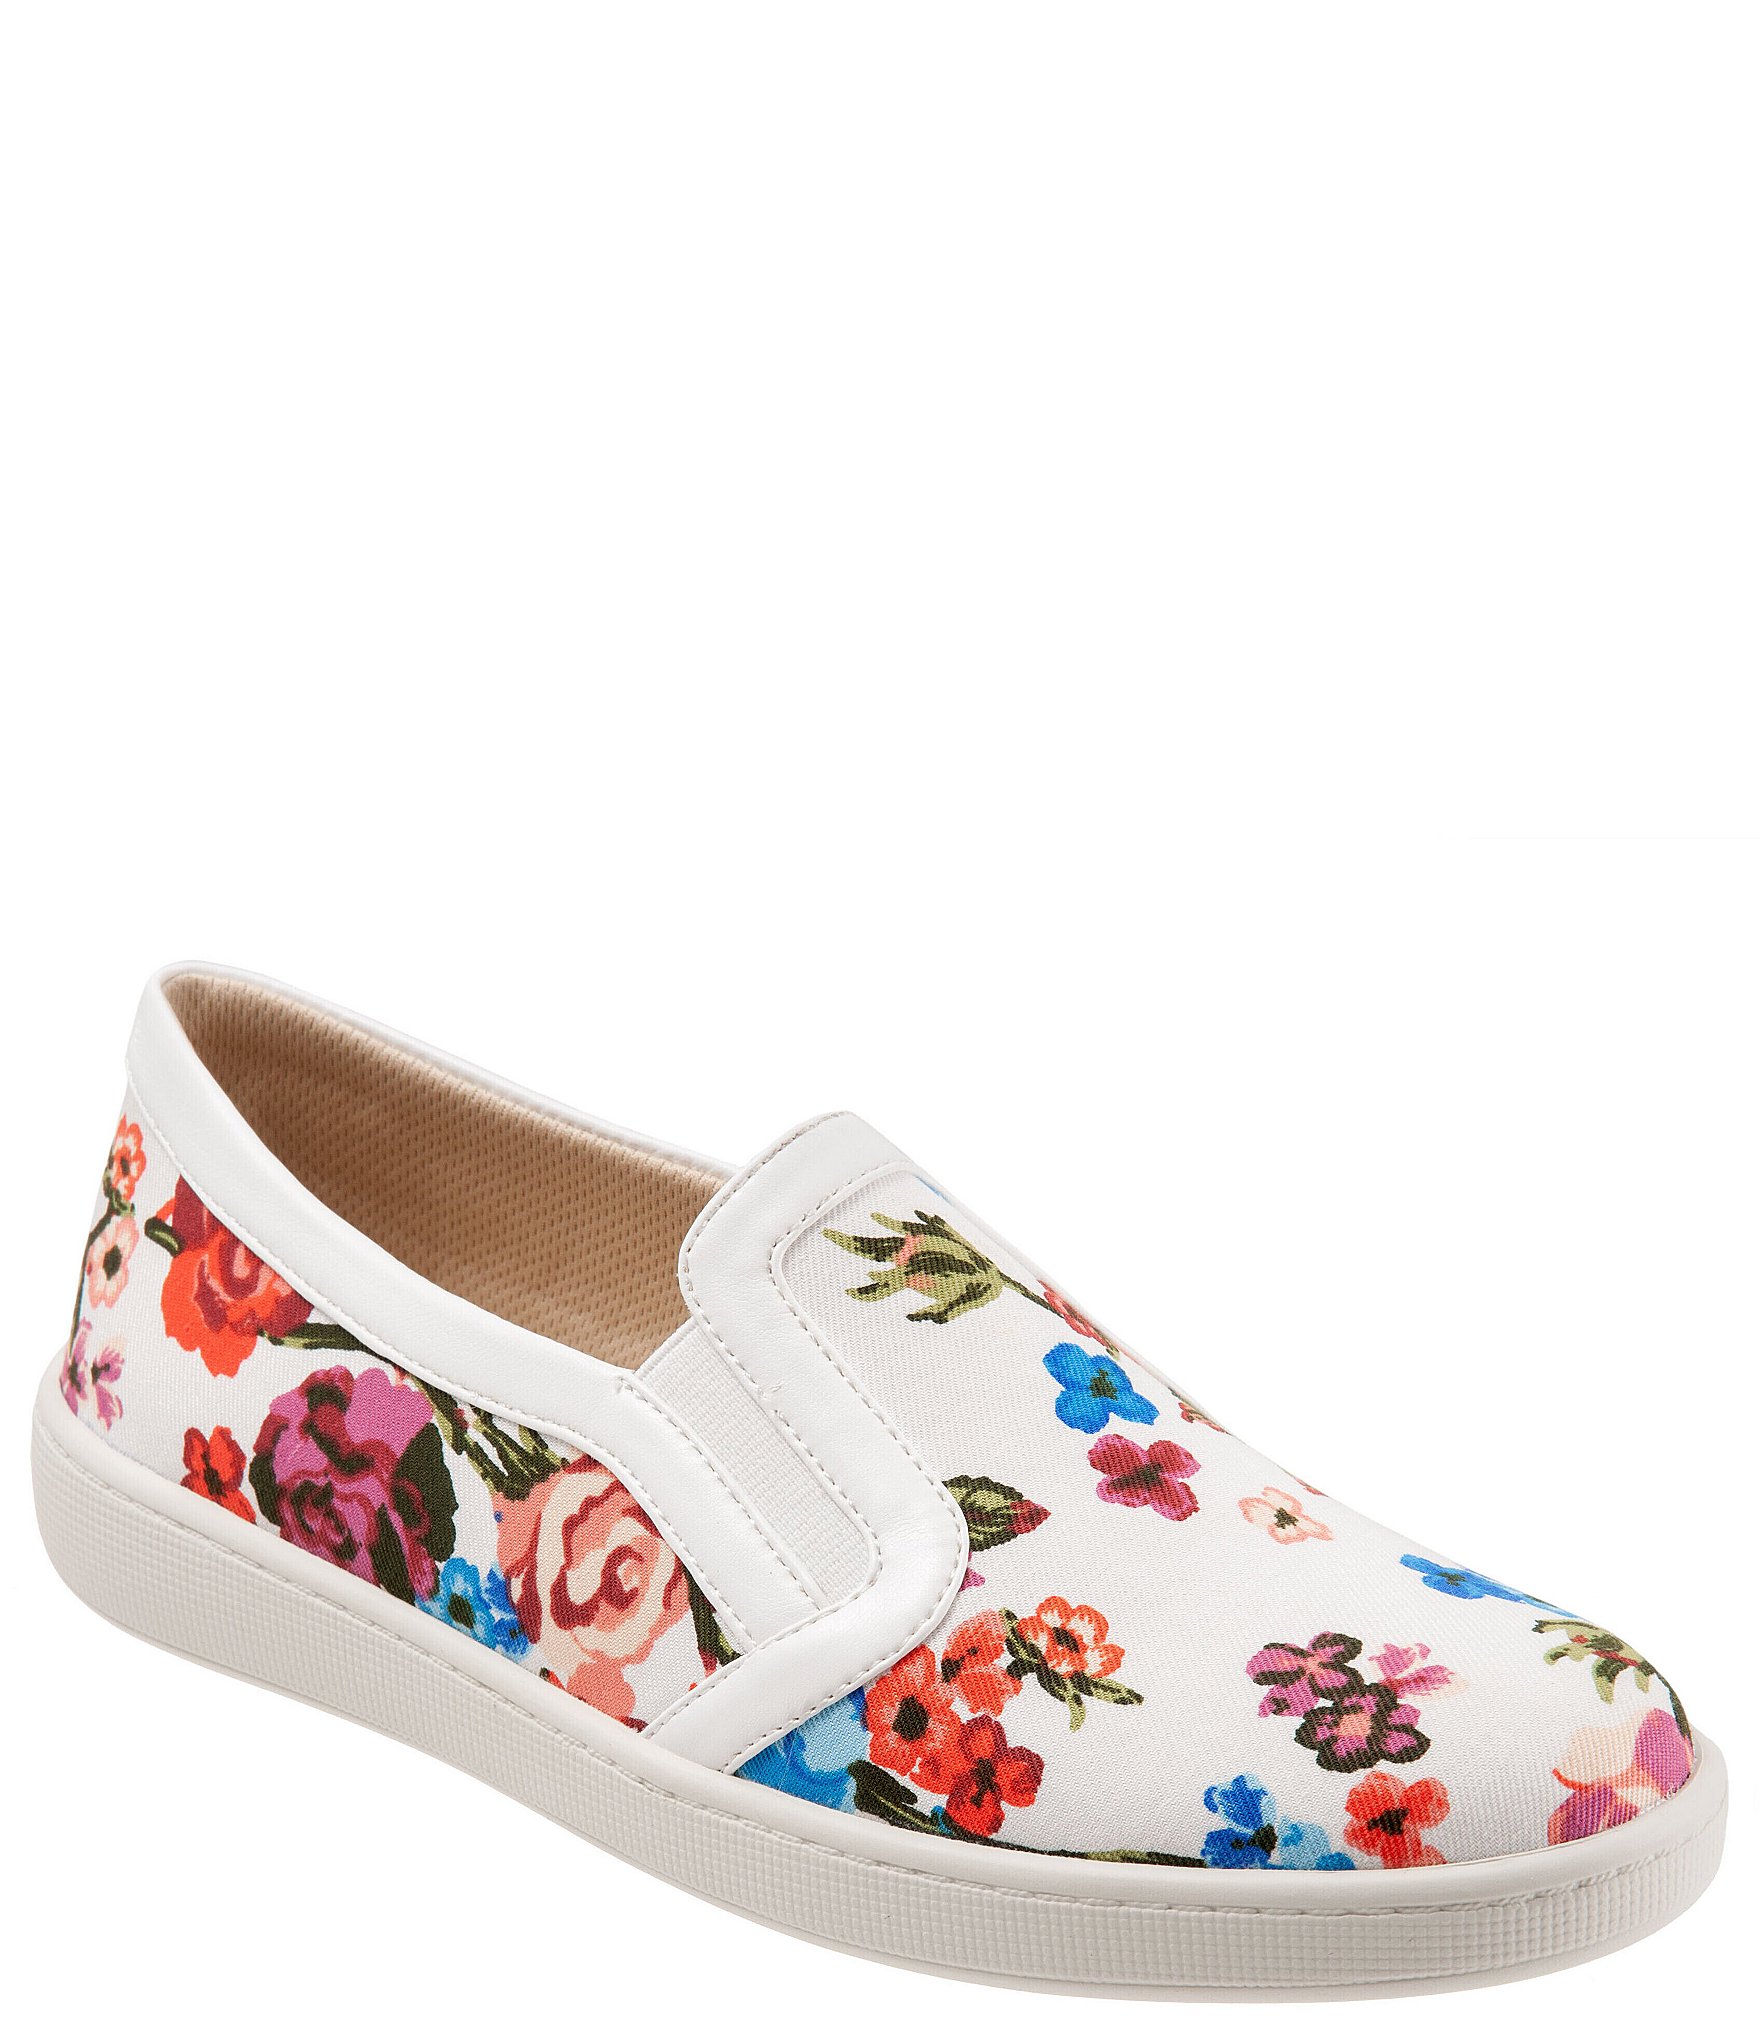 Floral White Canvas Slip On Shoes for Women